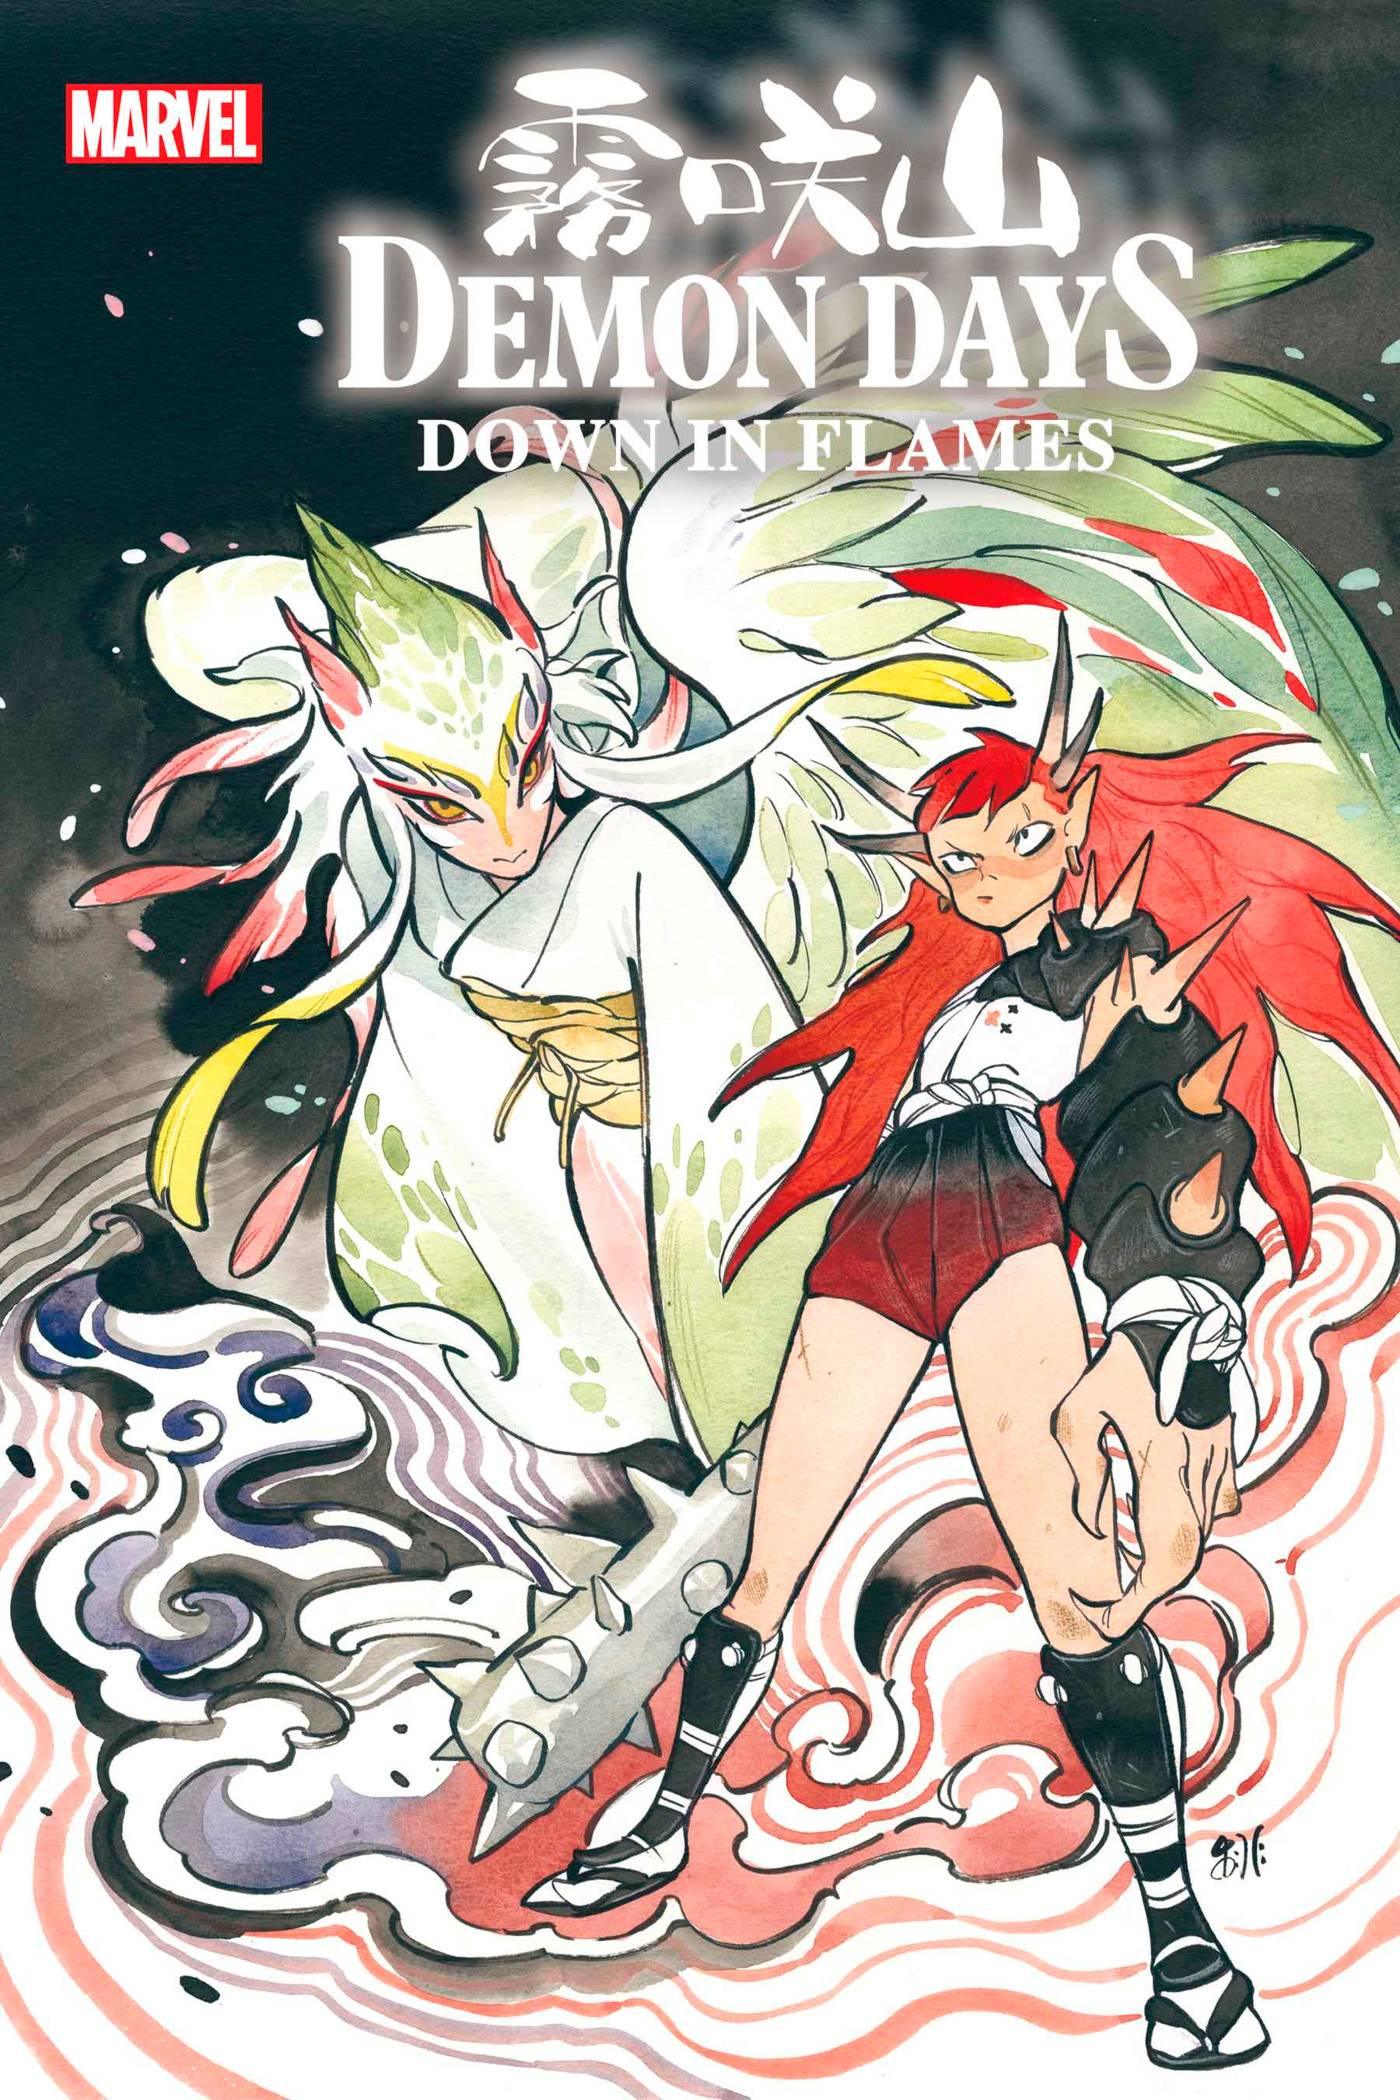 DEMON WARS DOWN IN FLAMES #1 - HolyGrail Comix